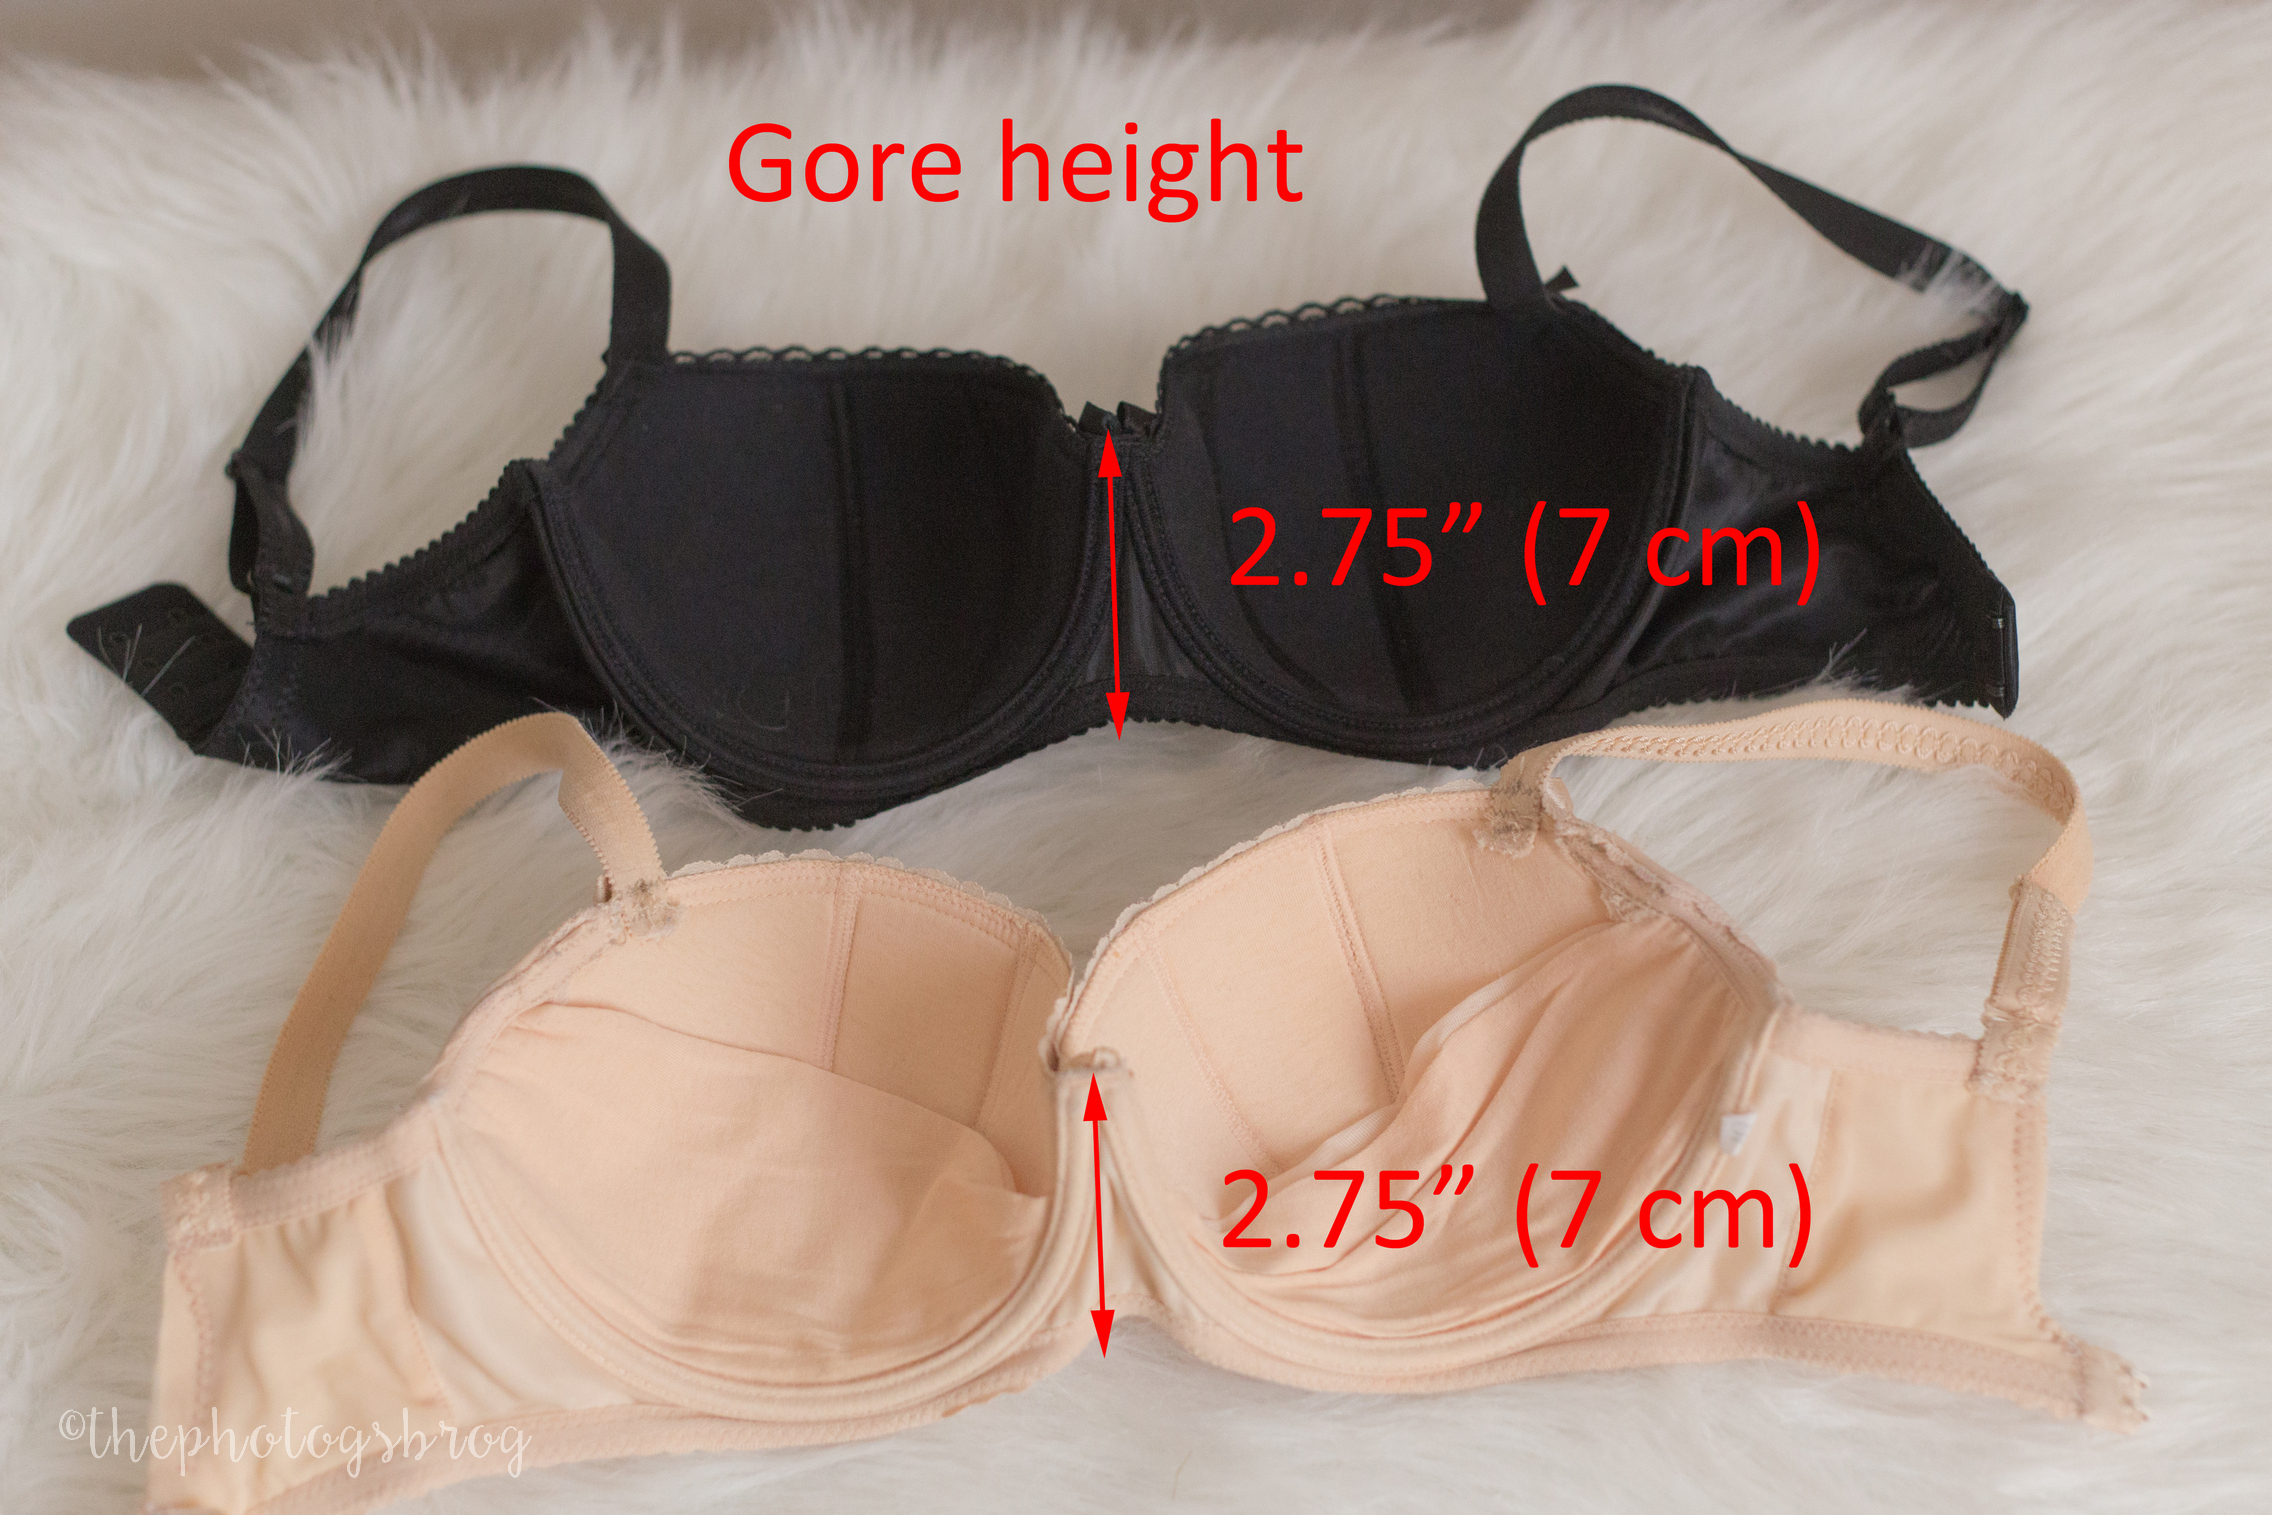 What Comexim cup size am I? 55F - Comexim » Mia Half Cup (567